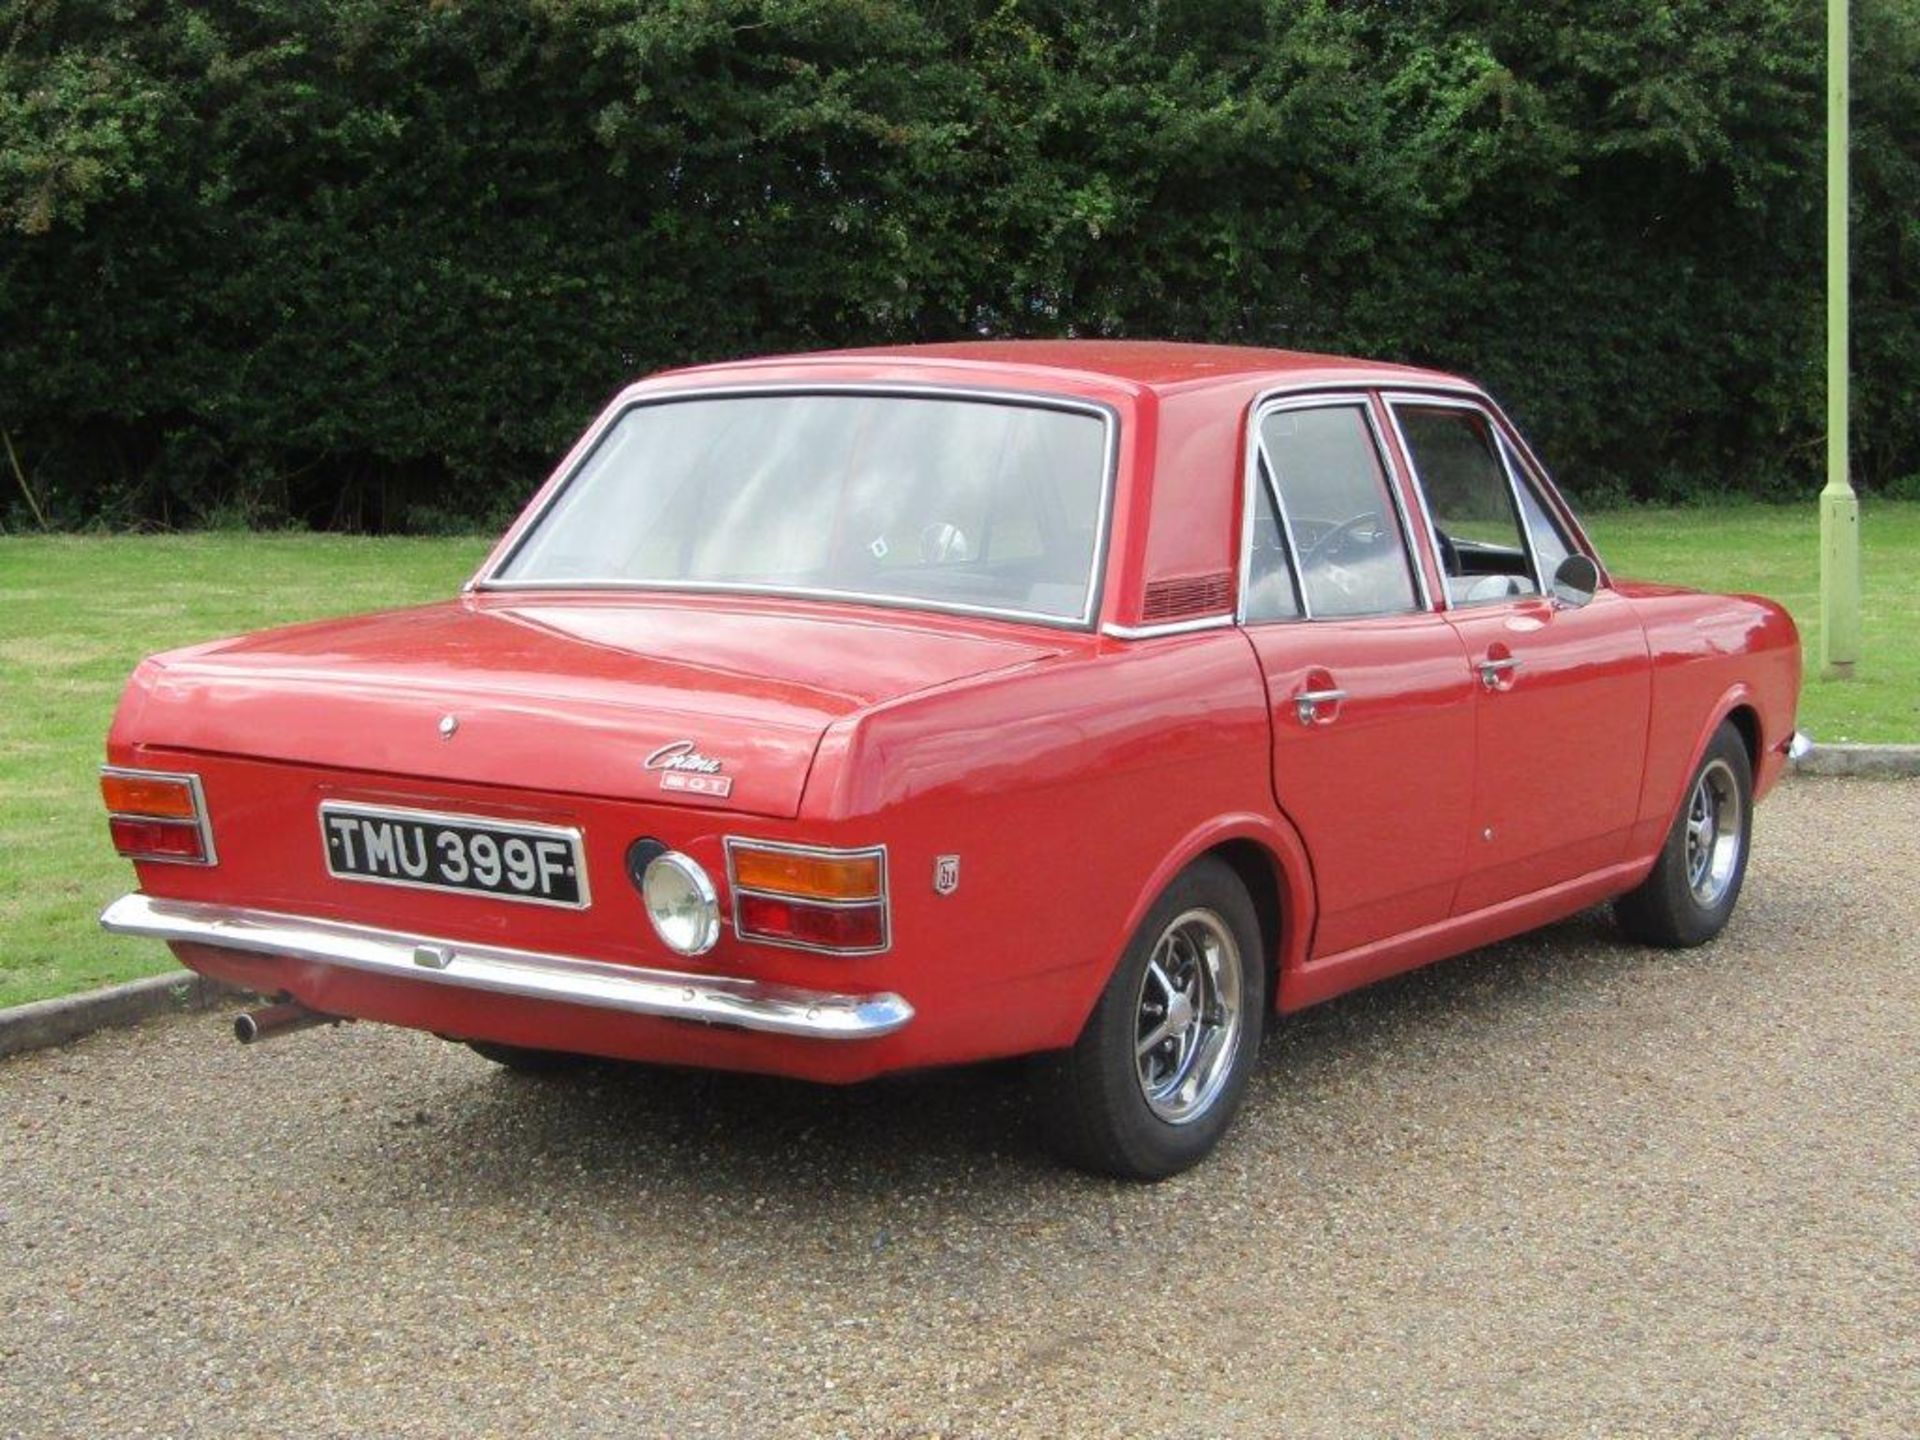 1968 Ford Cortina 1600 GT MKII - Image 6 of 11